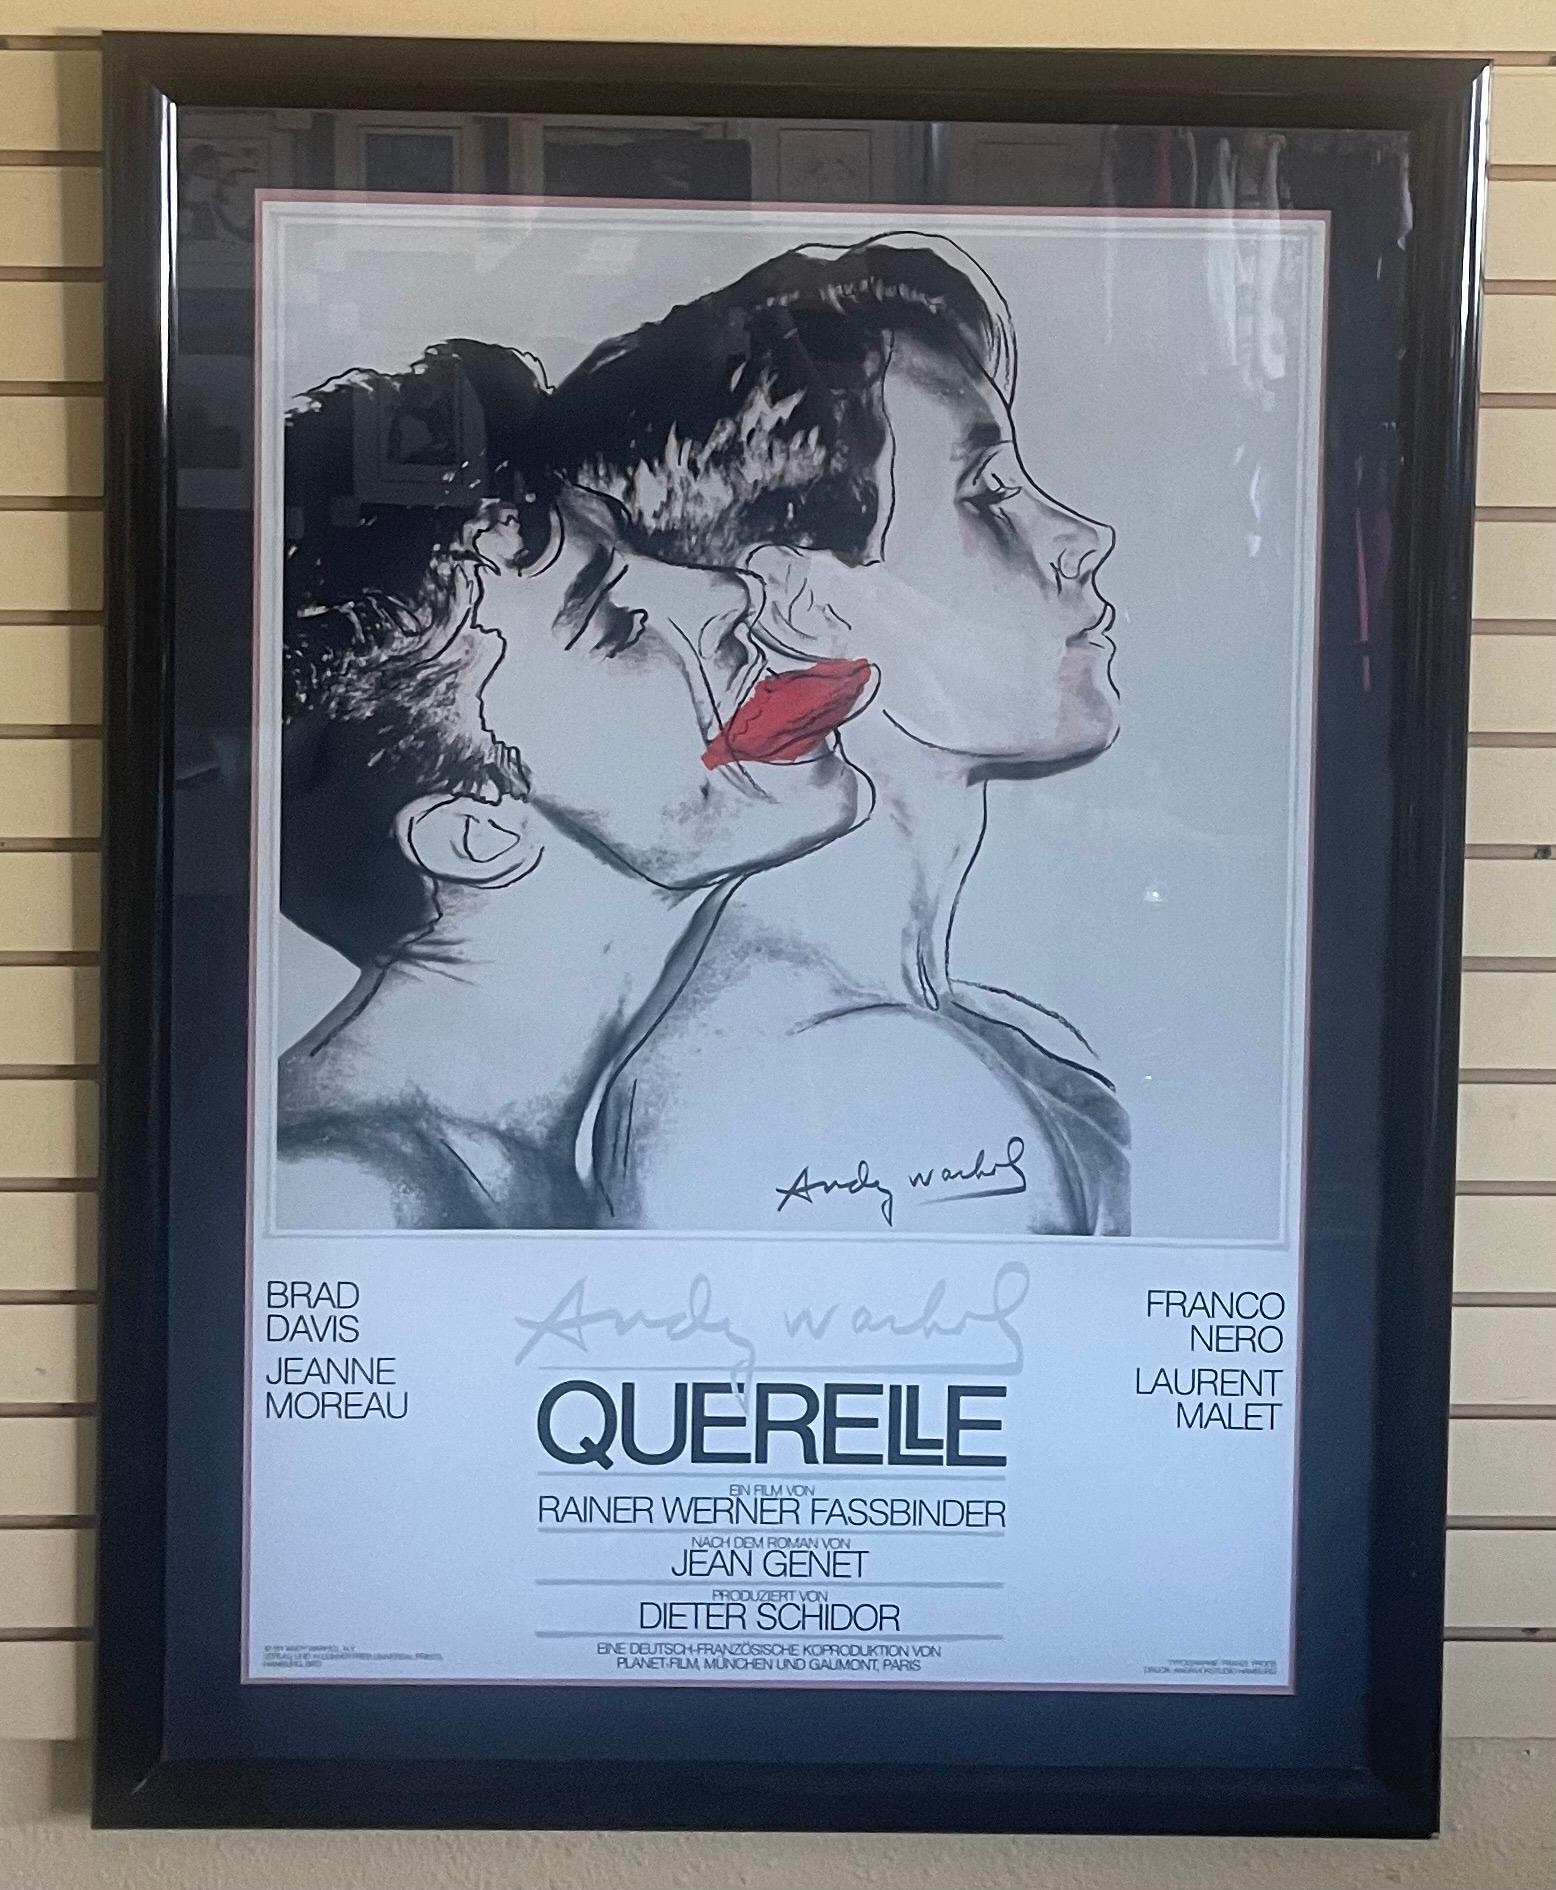 Querelle A27 (white) screen print by Andy Warhol, circa 1982. The print is in very good vintage condition and measures 27.5